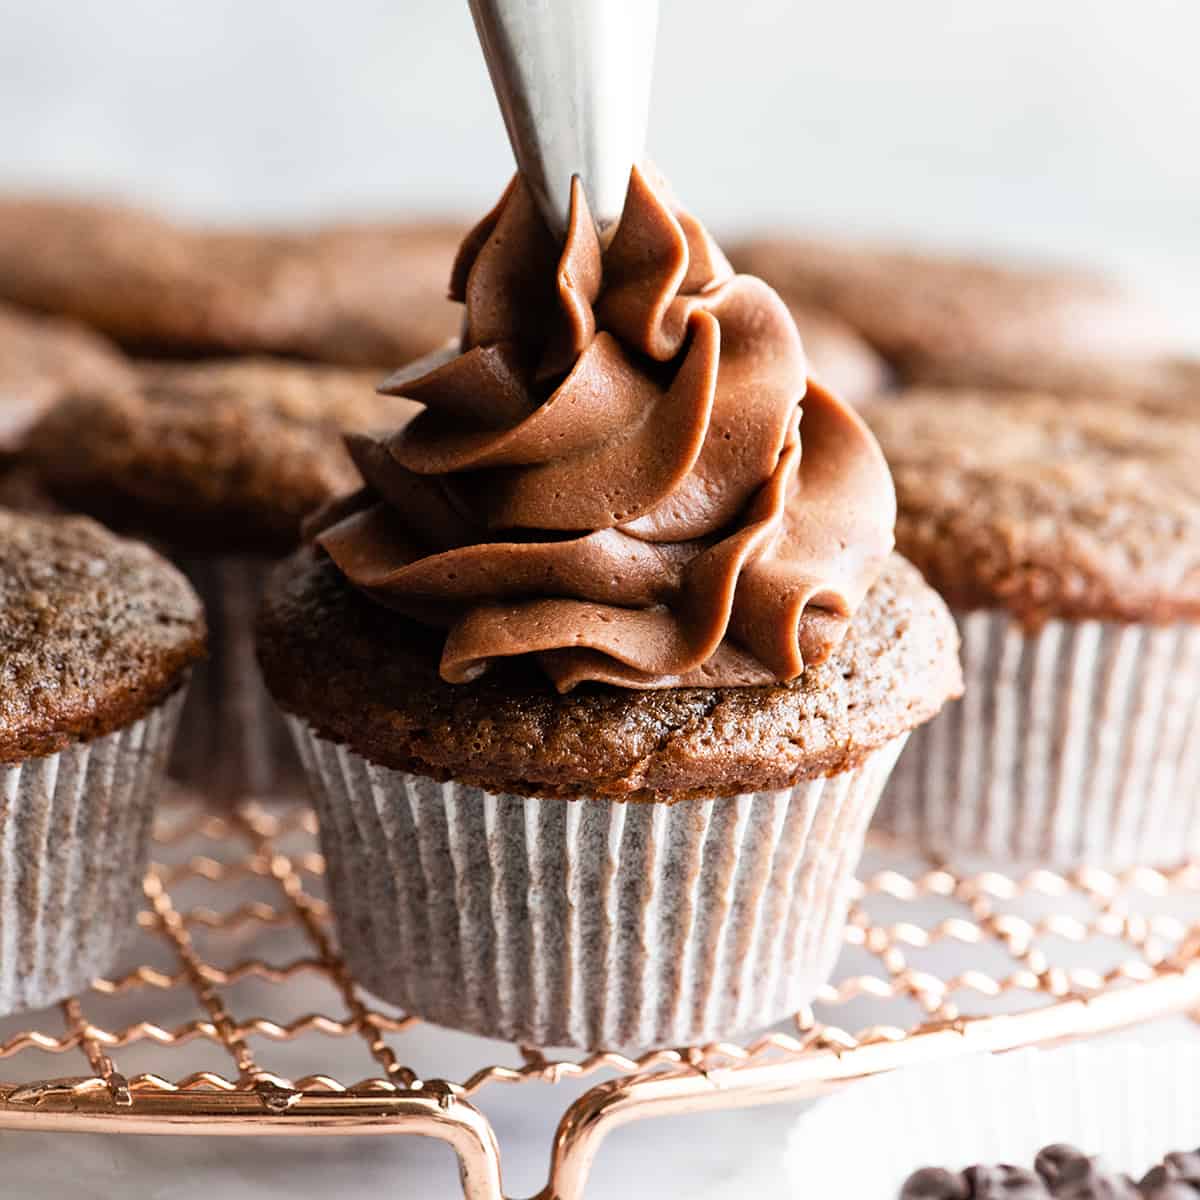 a photo of Chocolate Buttercream Frosting being piped onto a chocolate cupcake